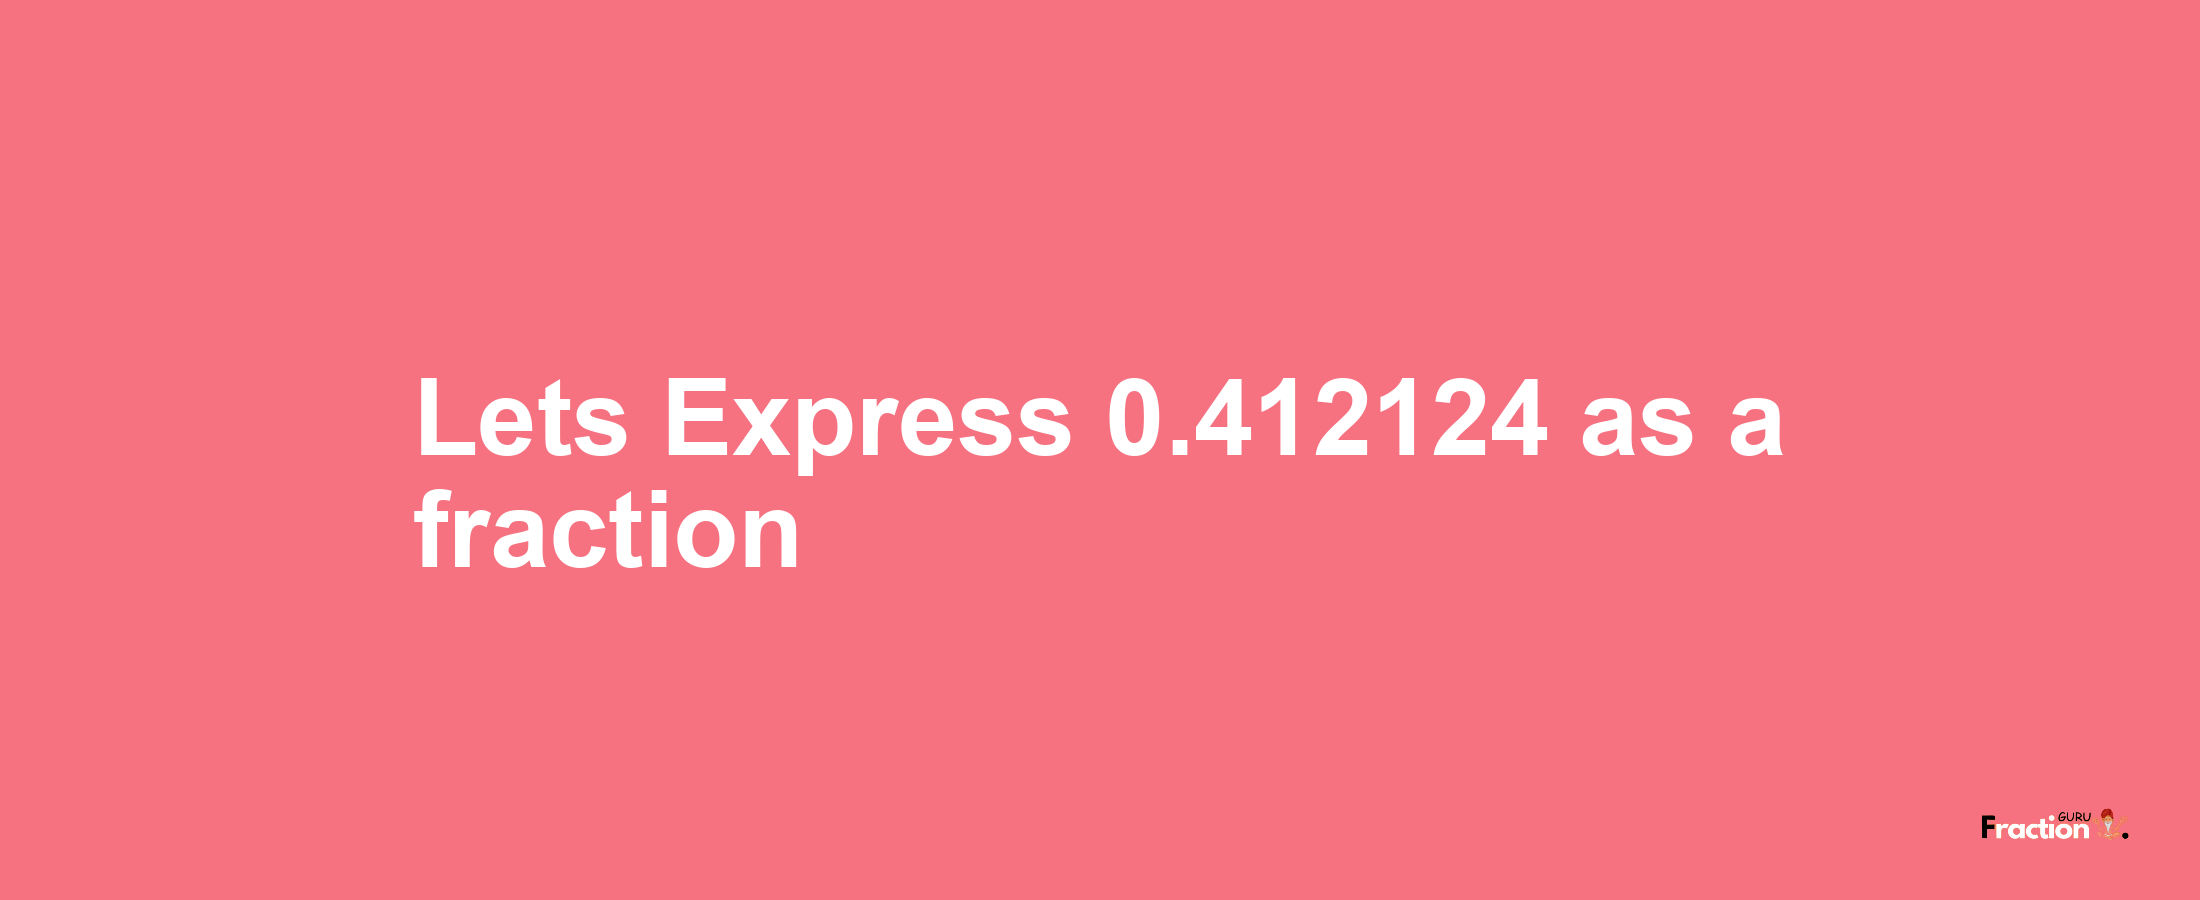 Lets Express 0.412124 as afraction